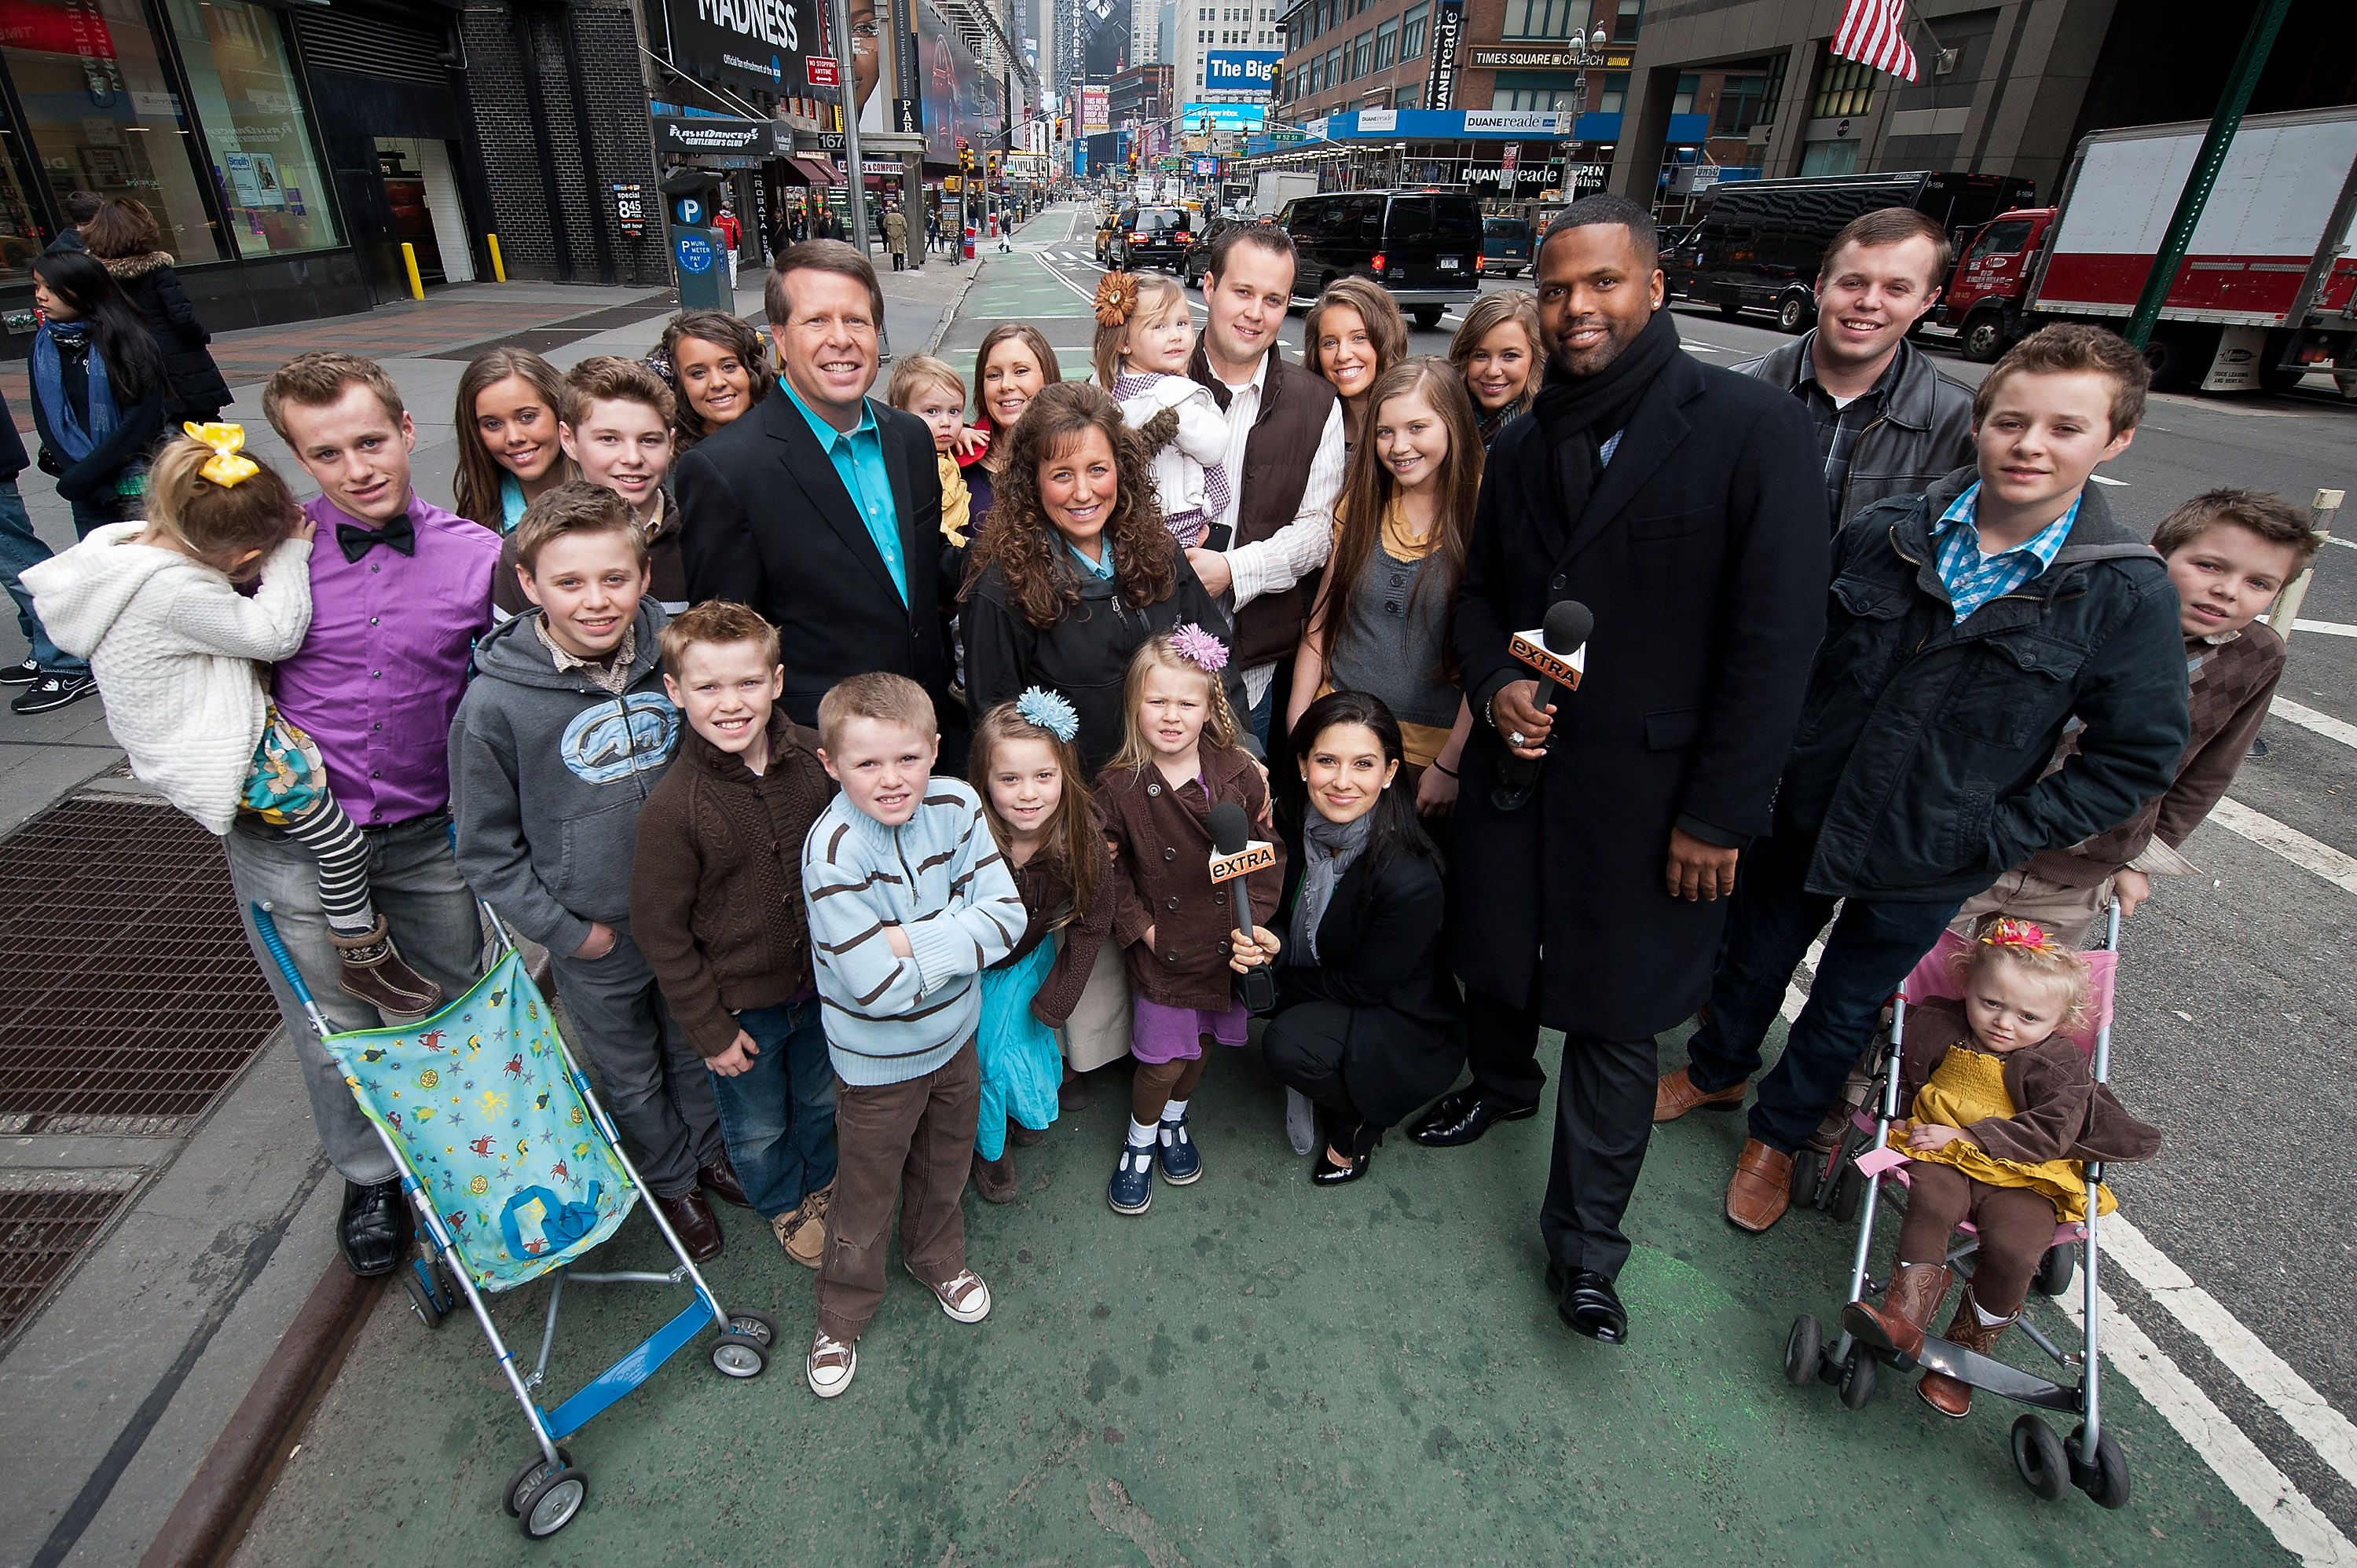 AJ Calloway and Hilaria Baldwin smile with the Duggar family during their visit to "Extra" in Times Square on March 11, 2013 in New York City. | Source: Getty Images